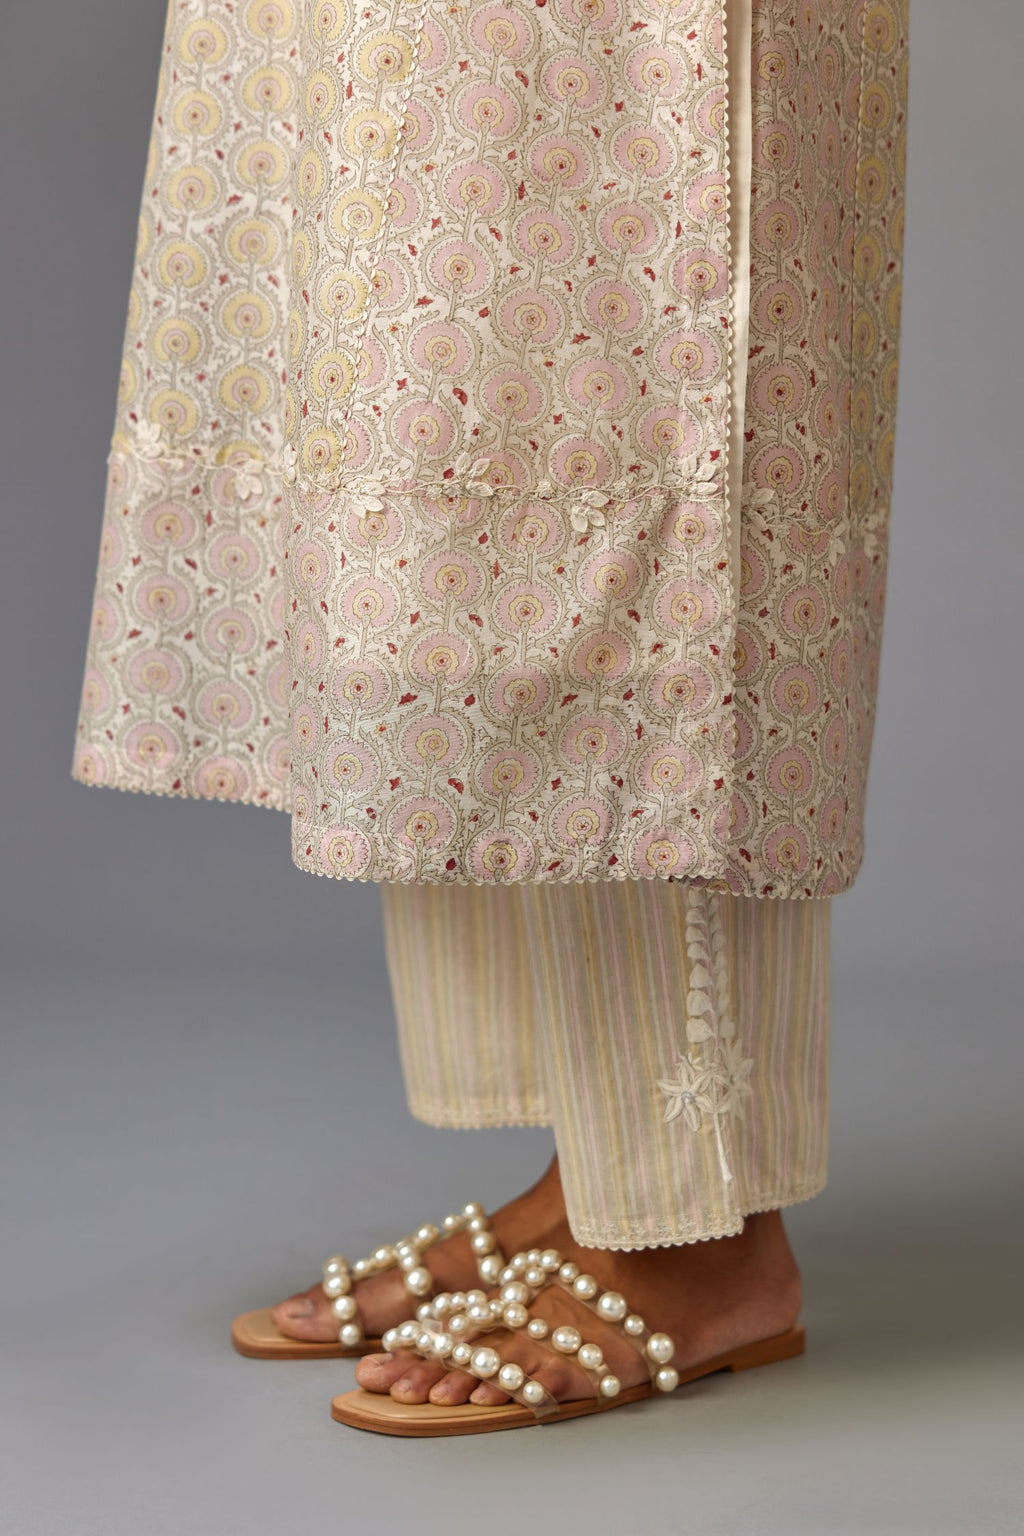 Multicolored mixed print hand-block printed straight kurta set with thread embroidery and chiffon flower buds at edges, highlighted with ric-rac lace.